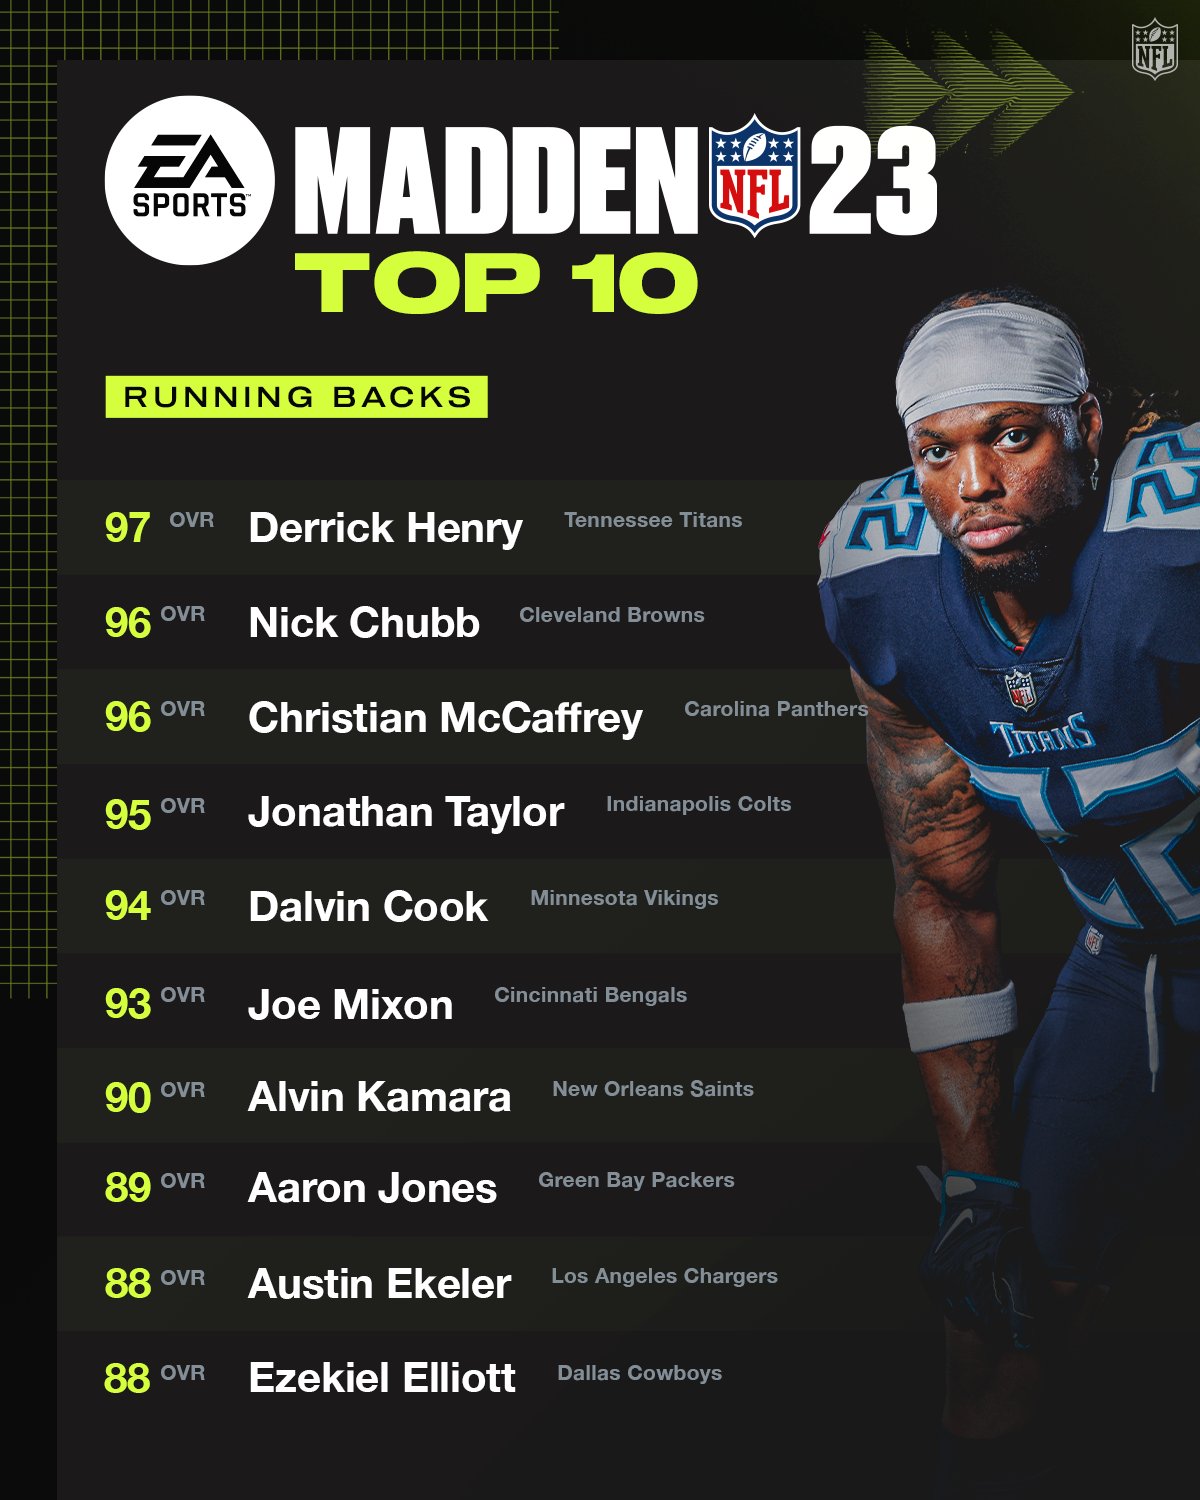 NFL on X: 'The Top 10 running backs in #Madden23.